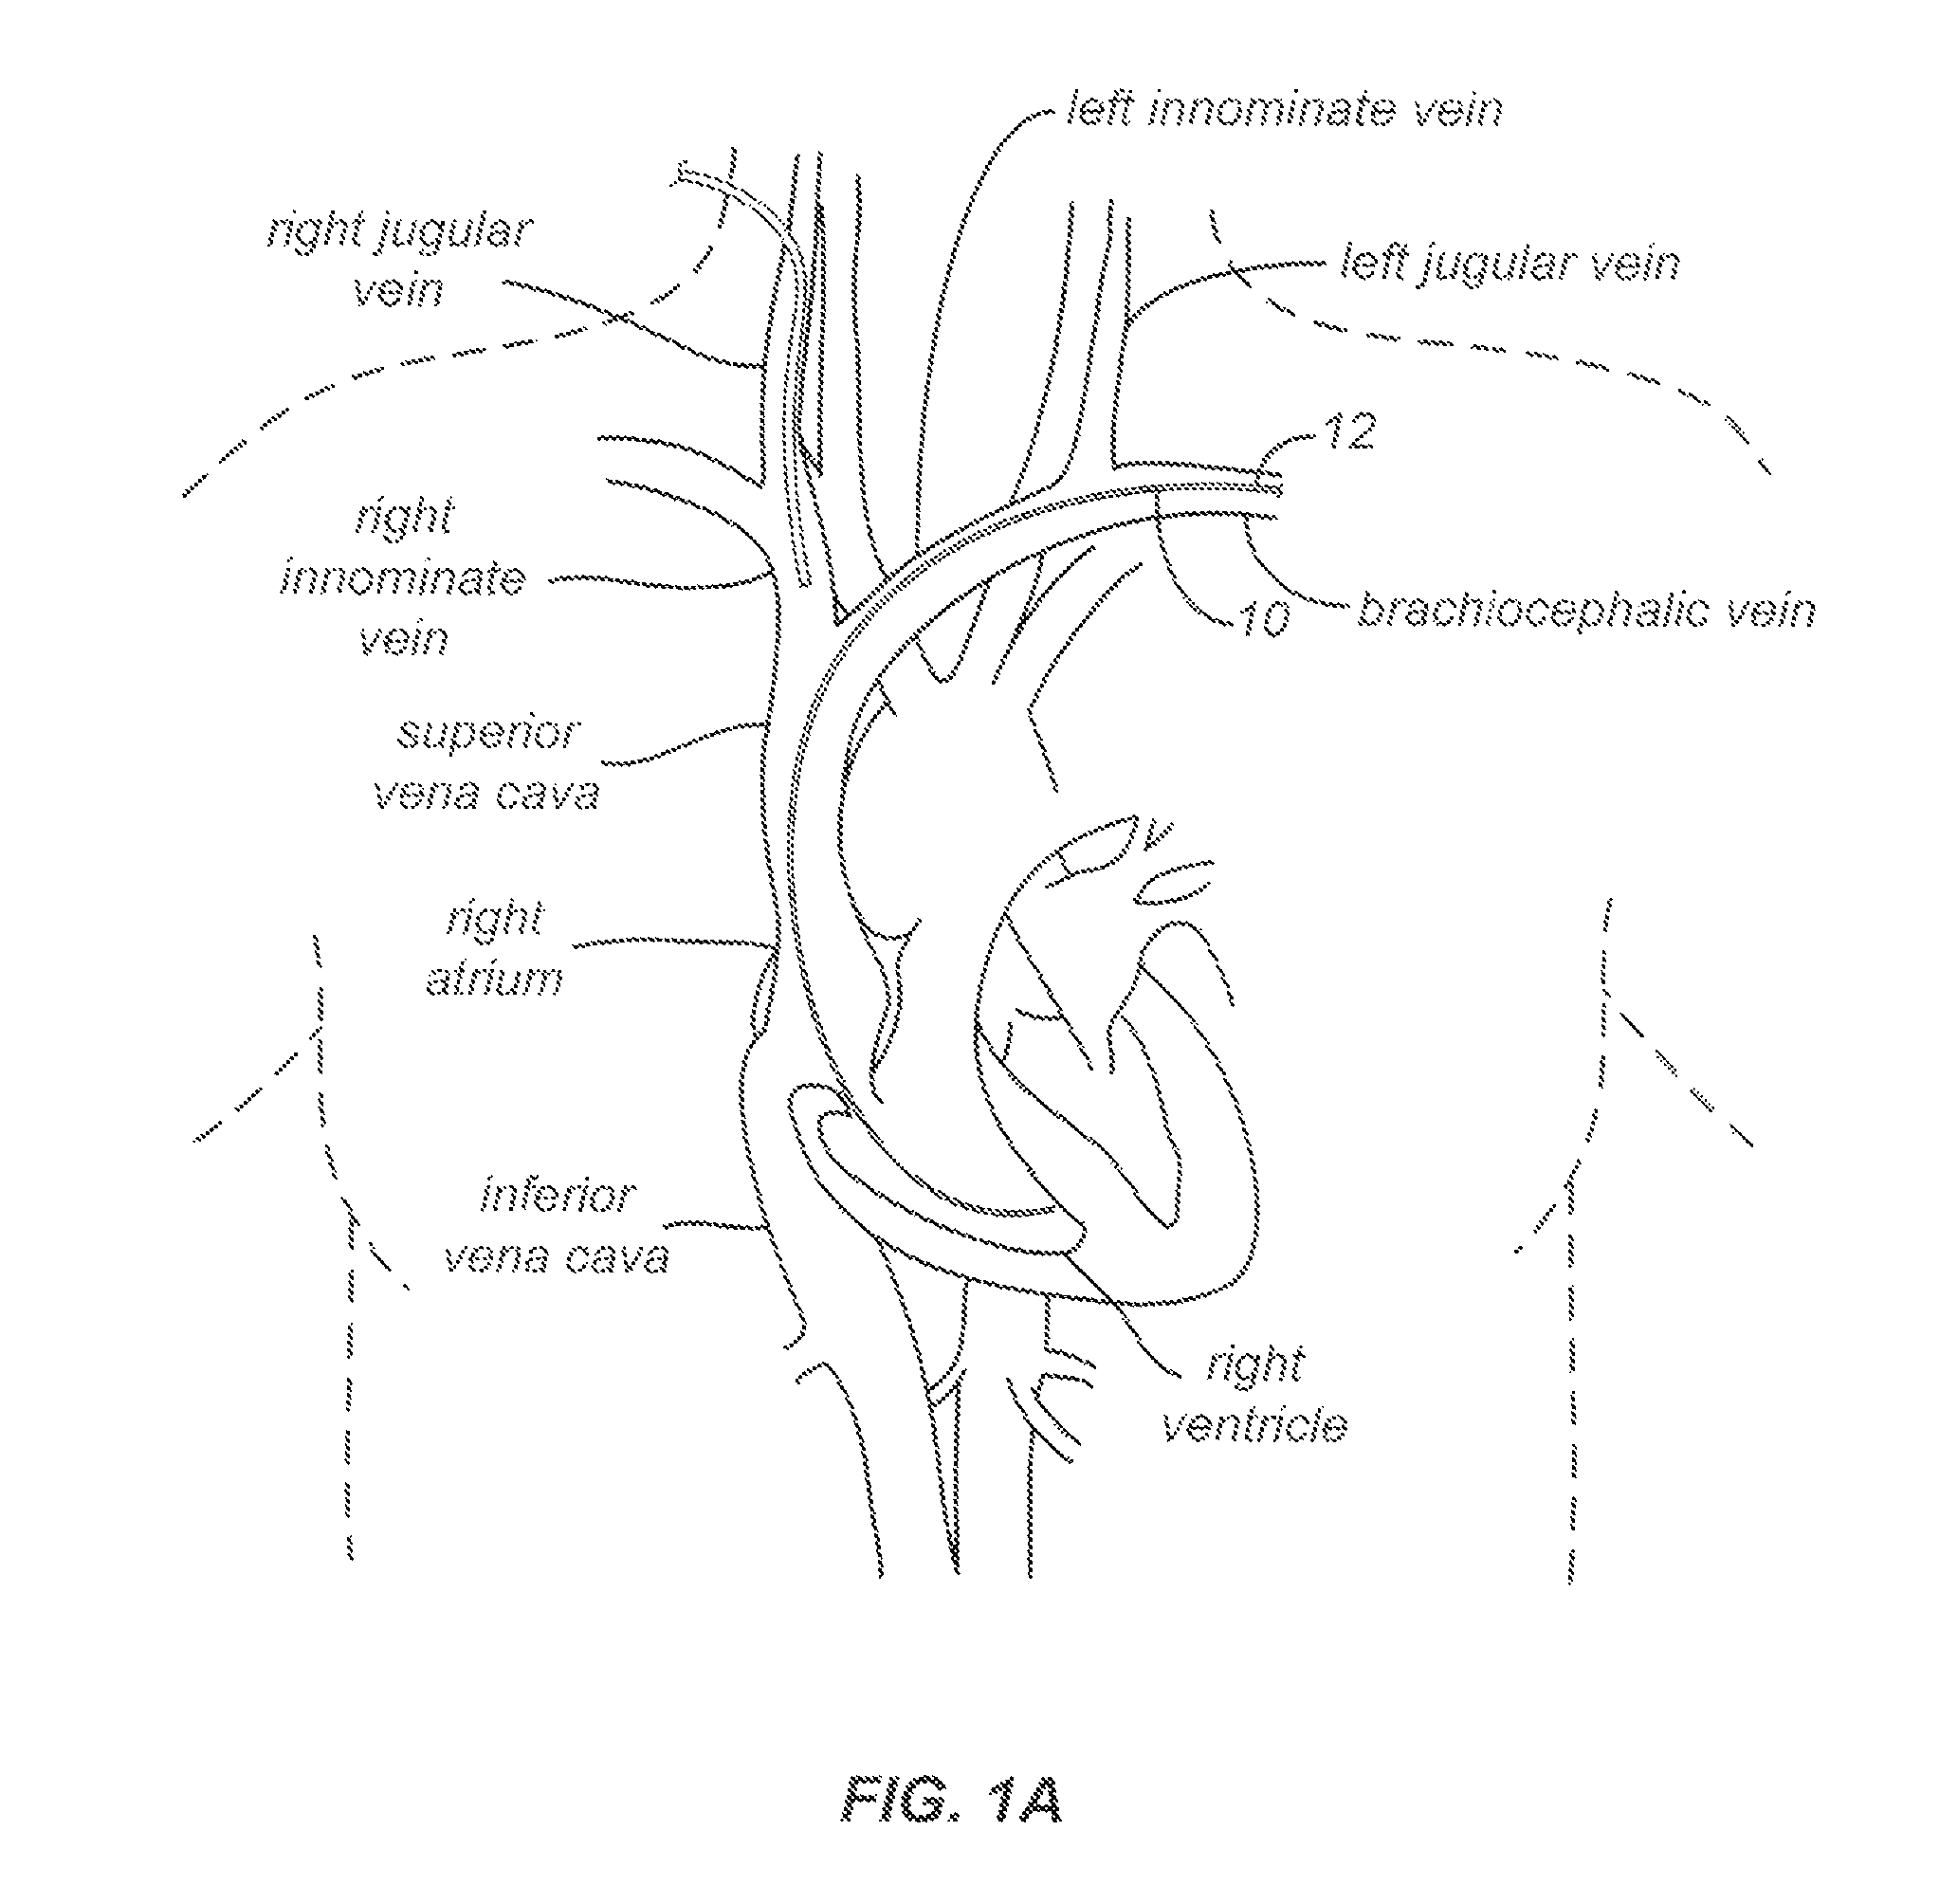 Snaring systems and methods